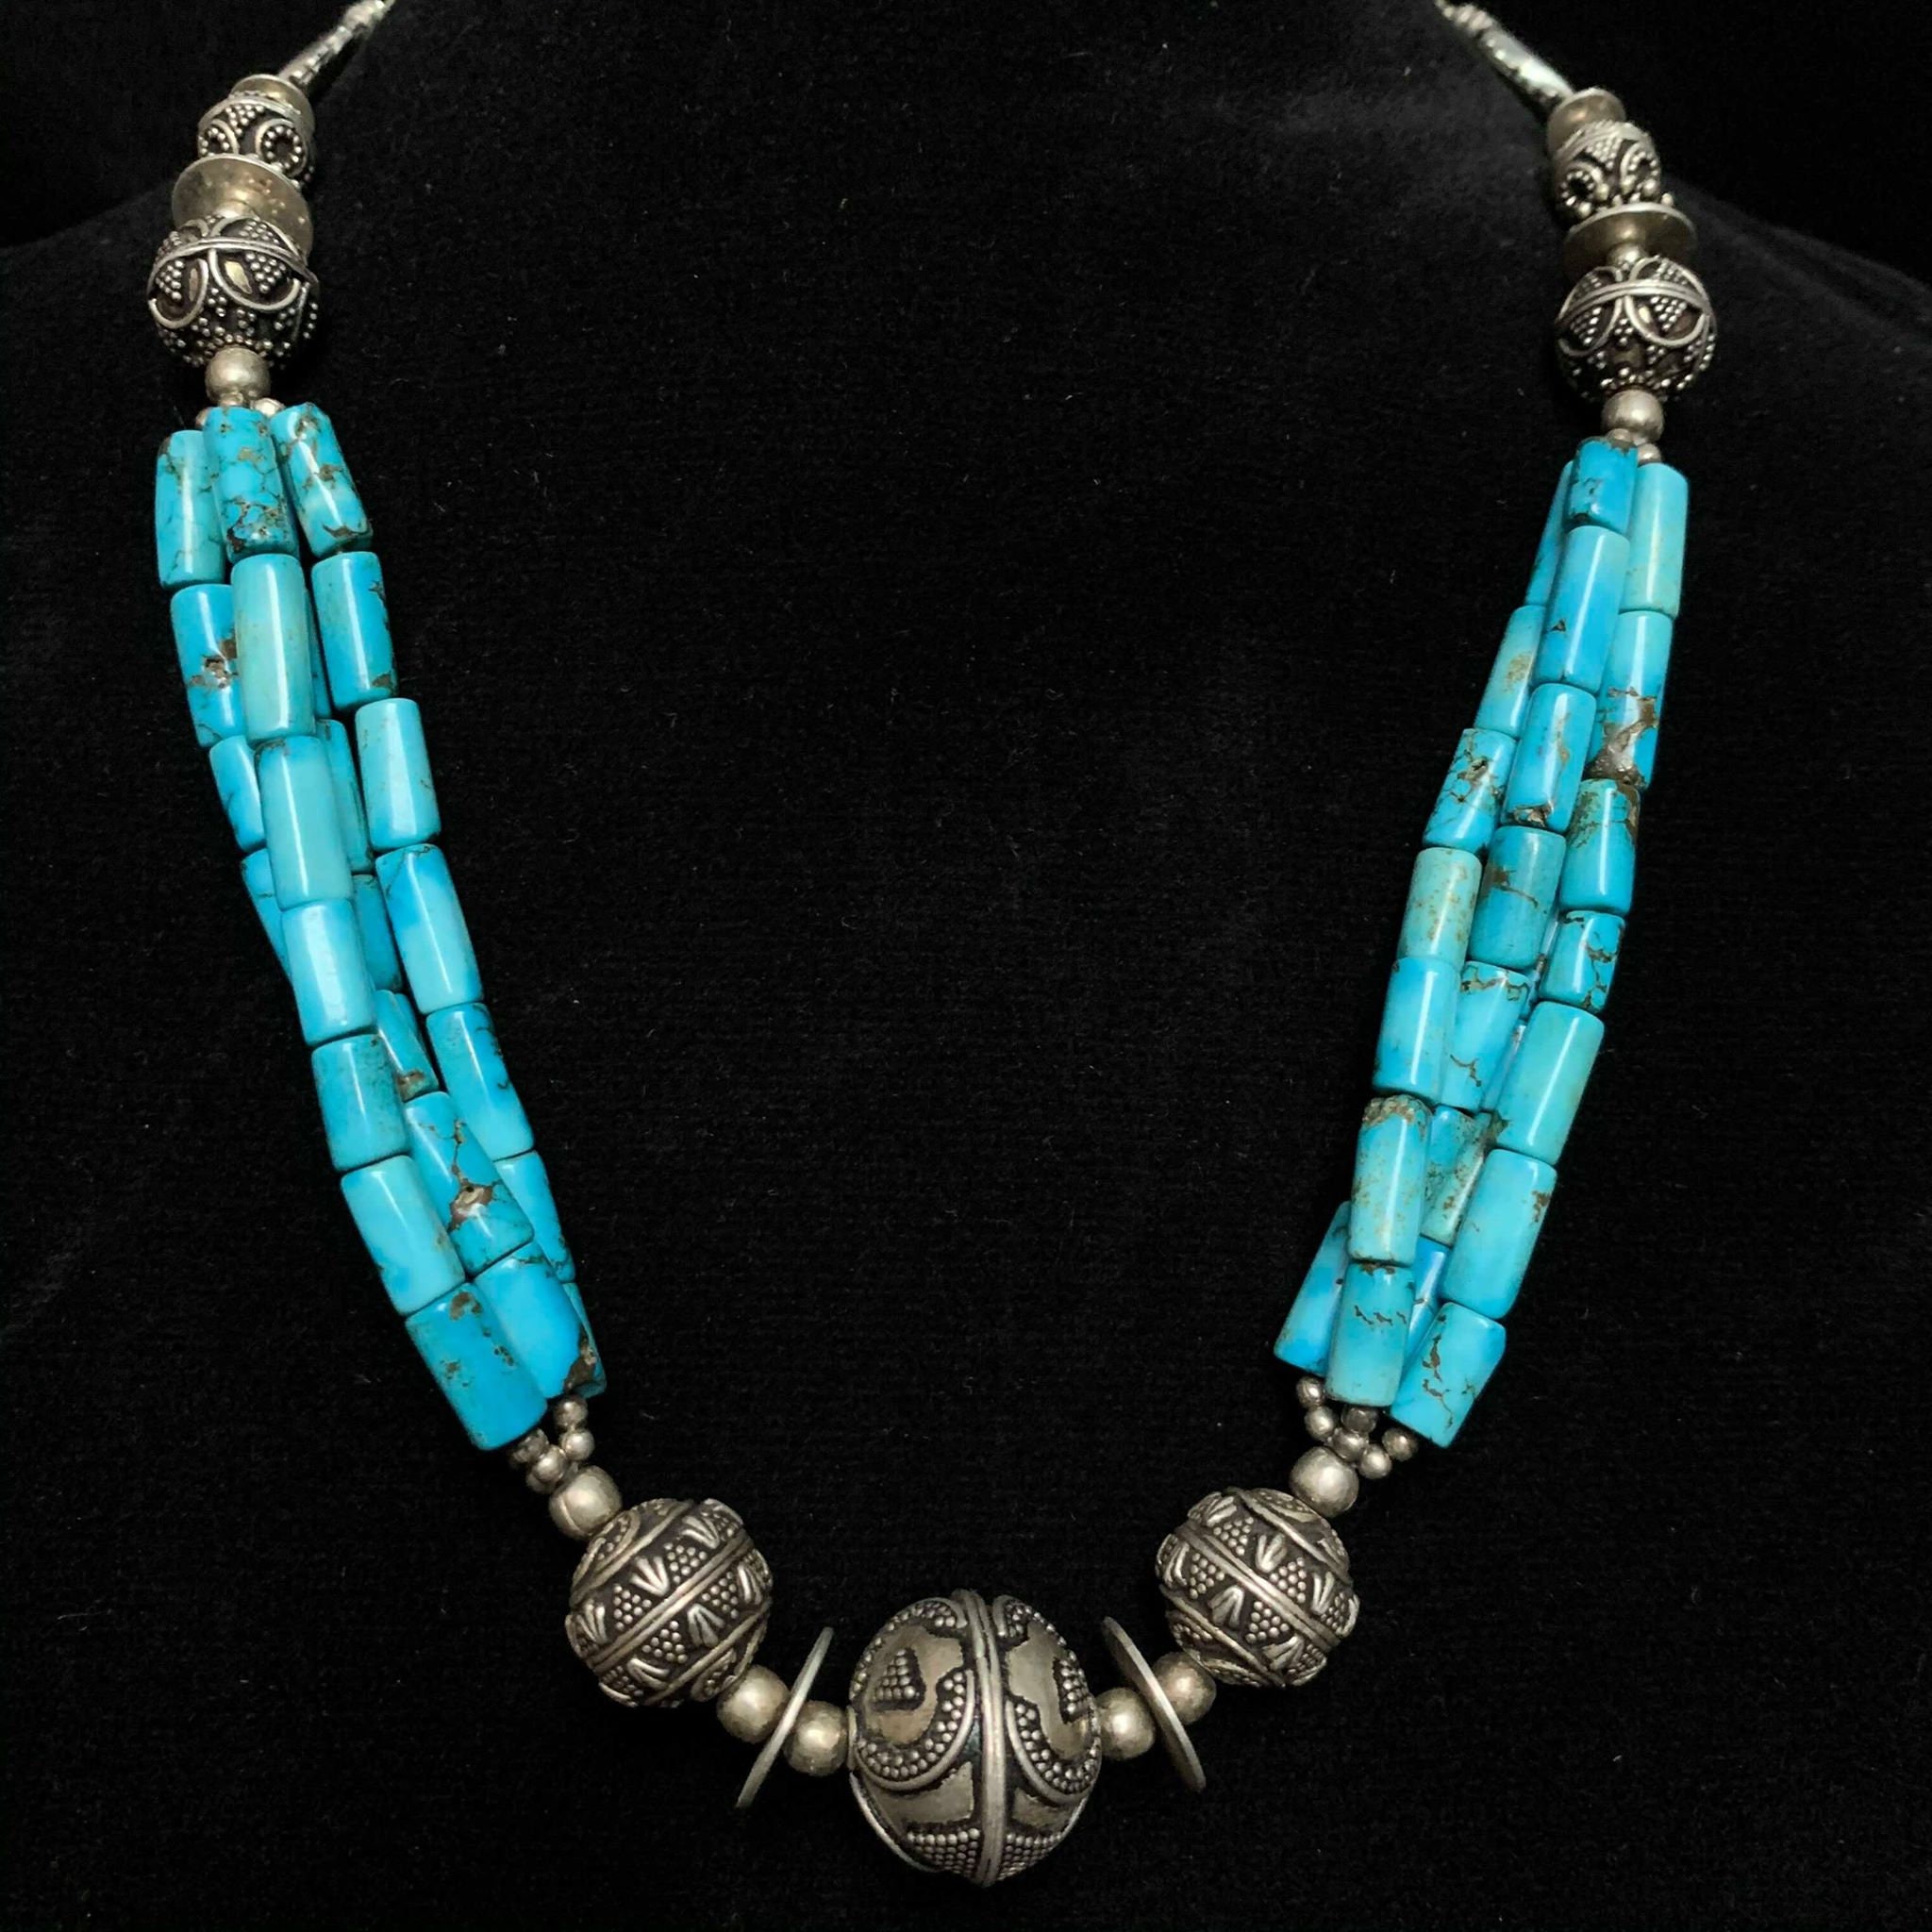 Nepali Silver Turquoise and Repousse Beaded Necklace - Etsy